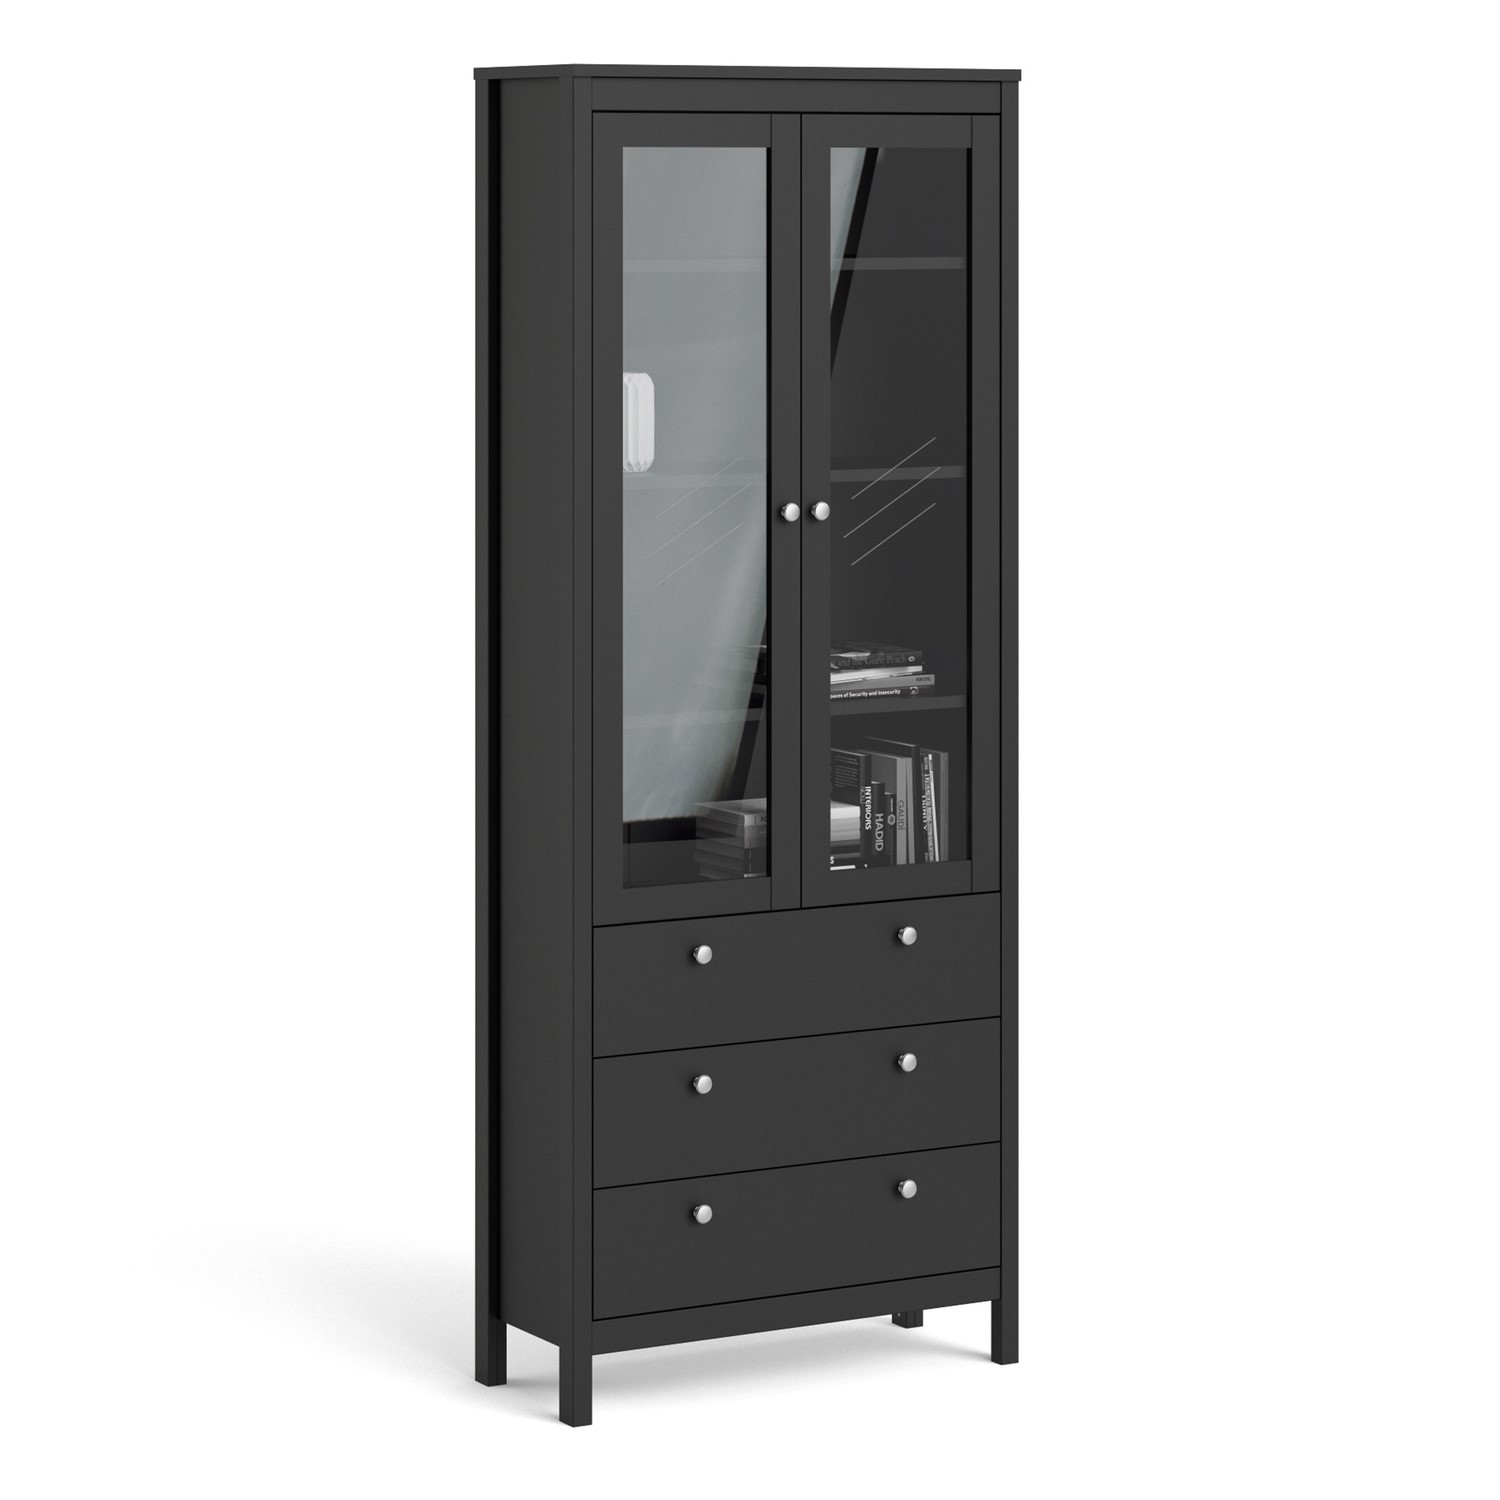 Read more about Tall black display cabinet with glass doors madrid